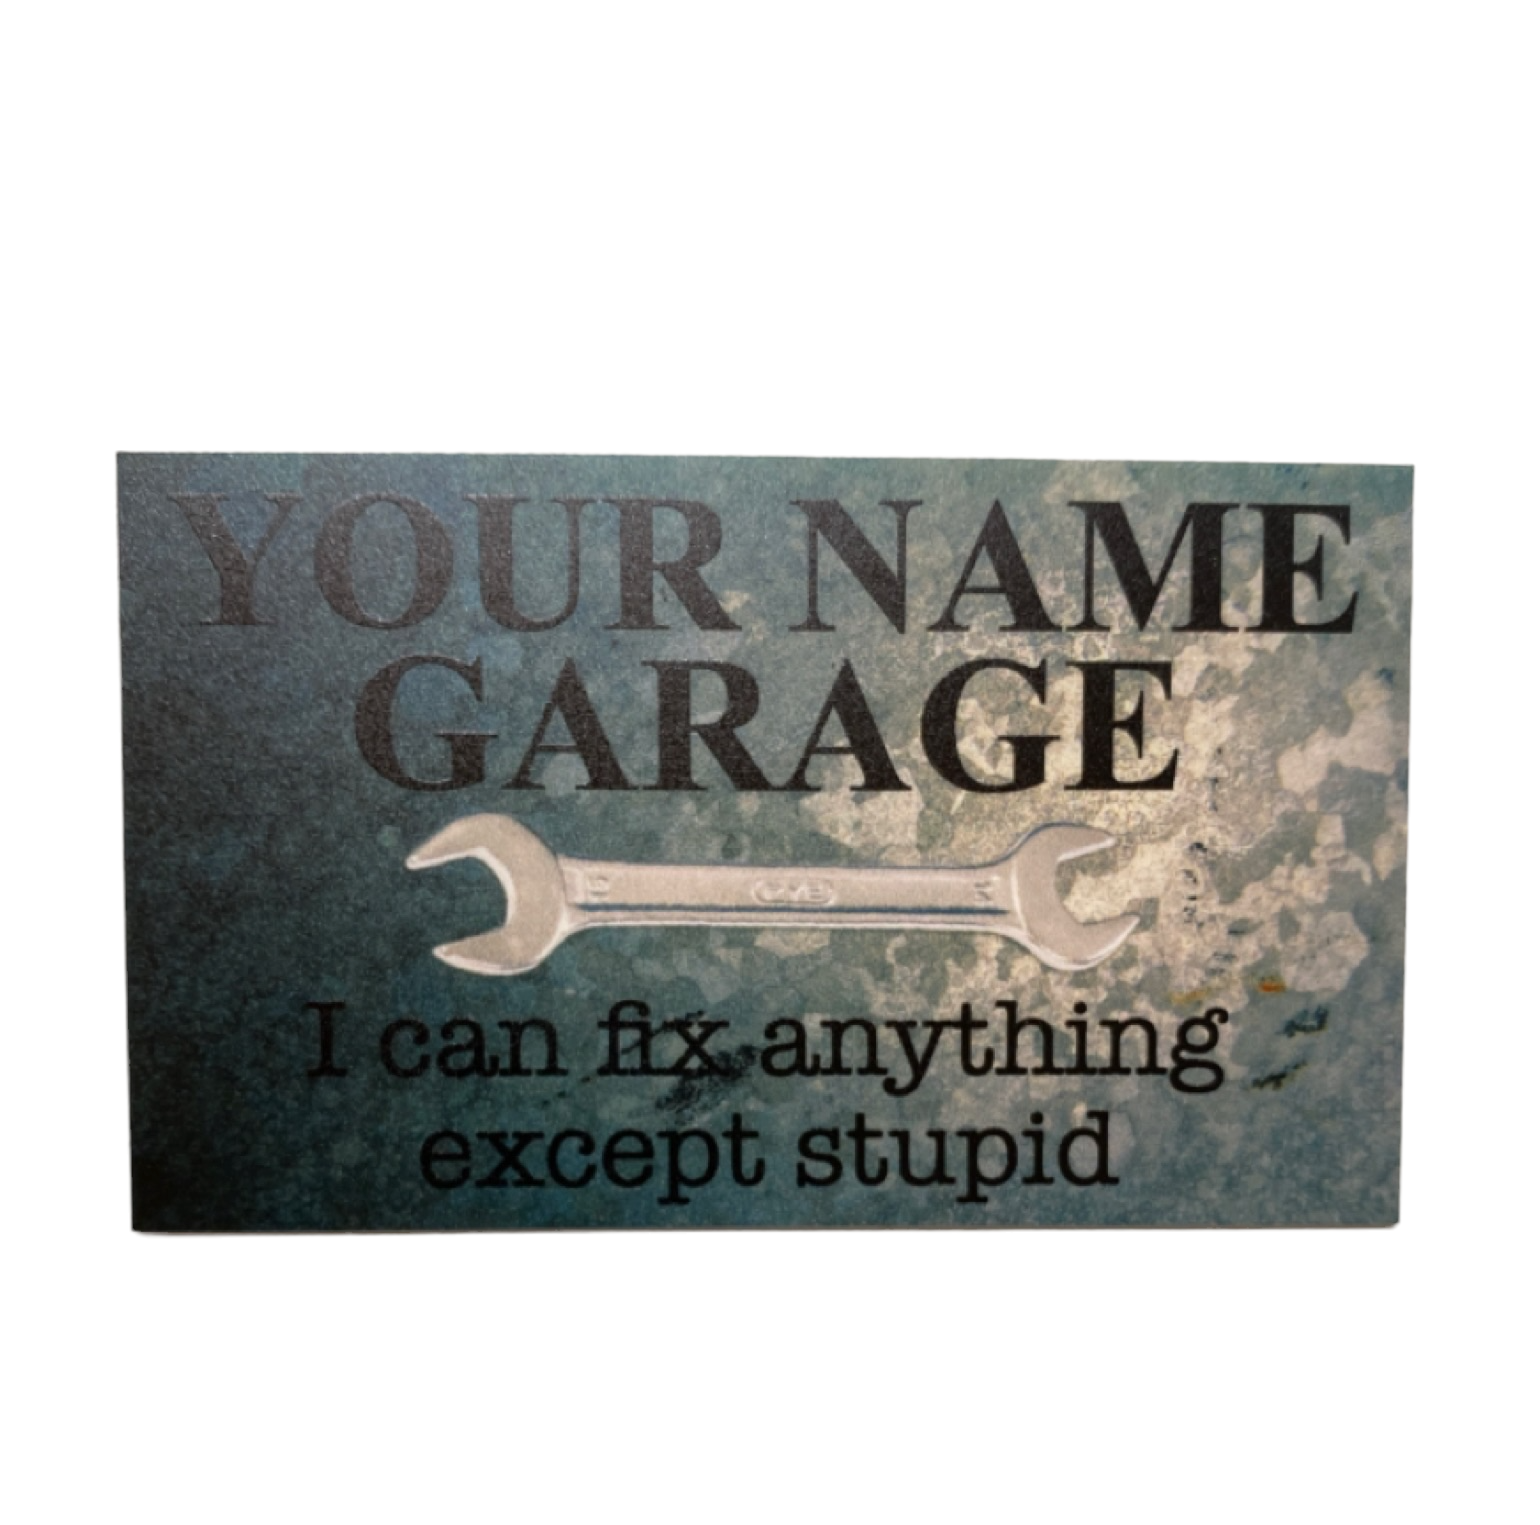 Garage Fix Anything Except Stupid Custom Sign - The Renmy Store Homewares & Gifts 